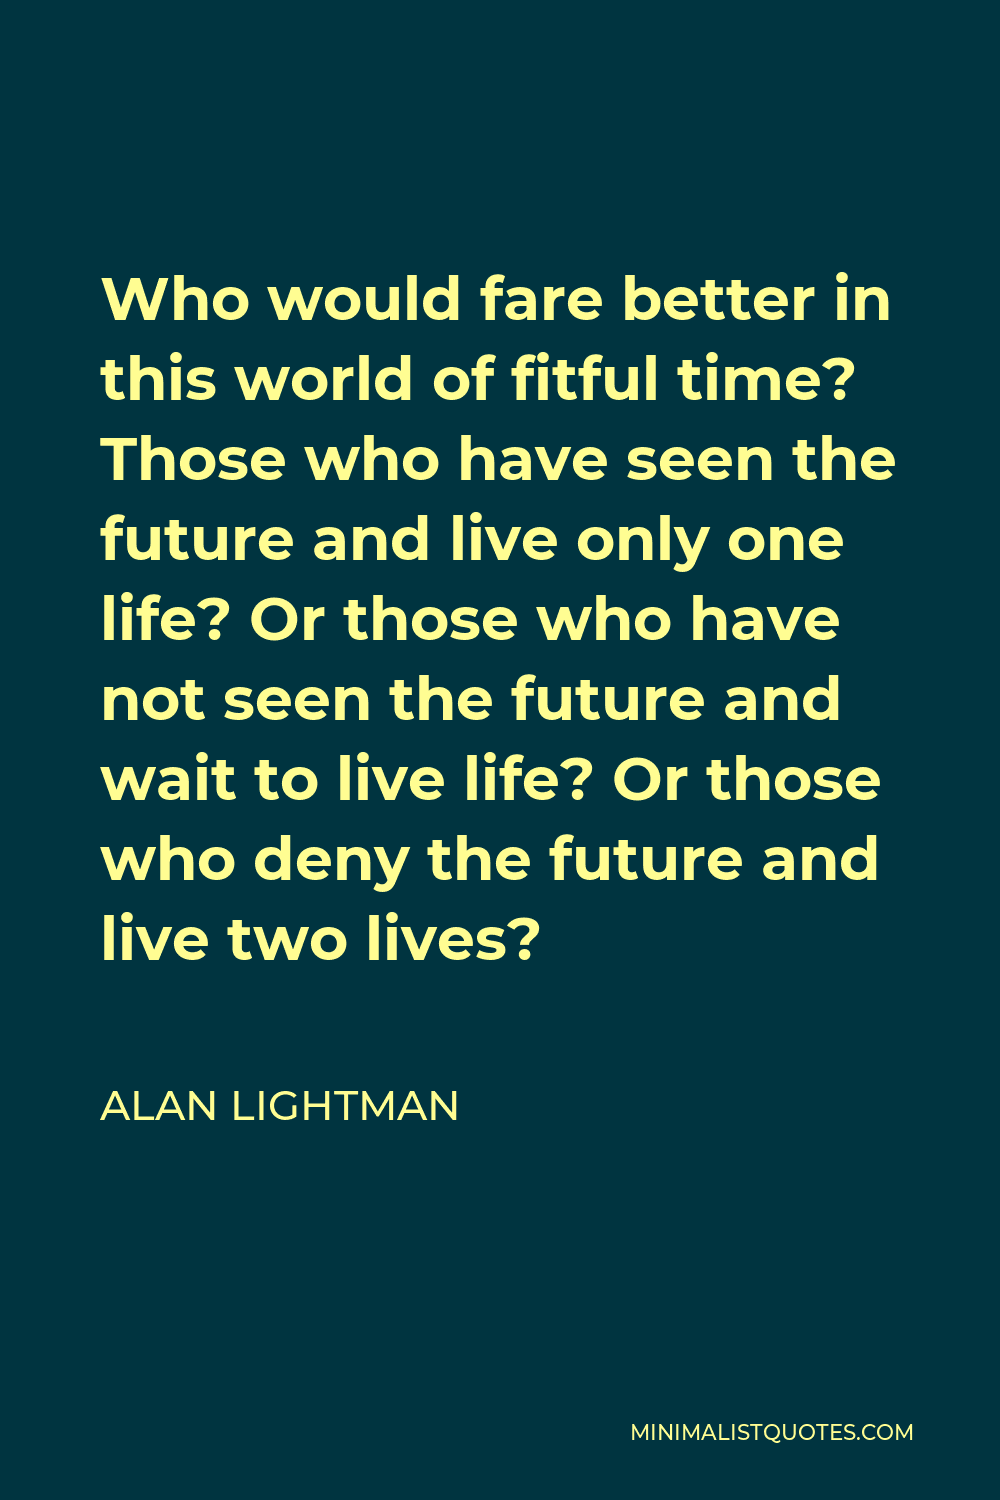 Alan Lightman Quote - Who would fare better in this world of fitful time? Those who have seen the future and live only one life? Or those who have not seen the future and wait to live life? Or those who deny the future and live two lives?